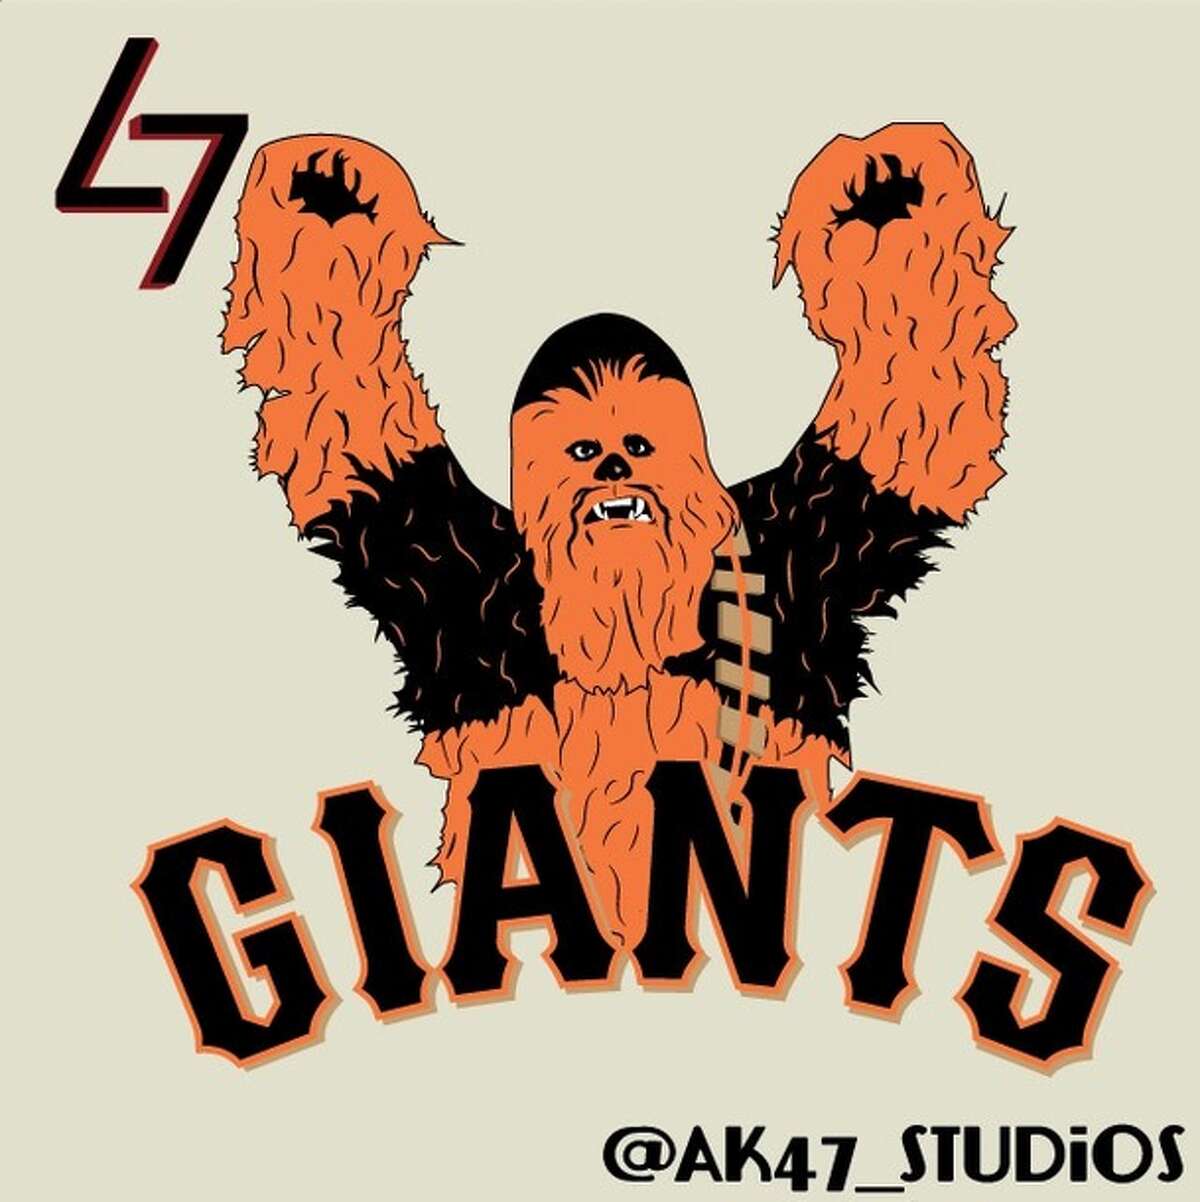 The San Francisco Giants and Chewbacca